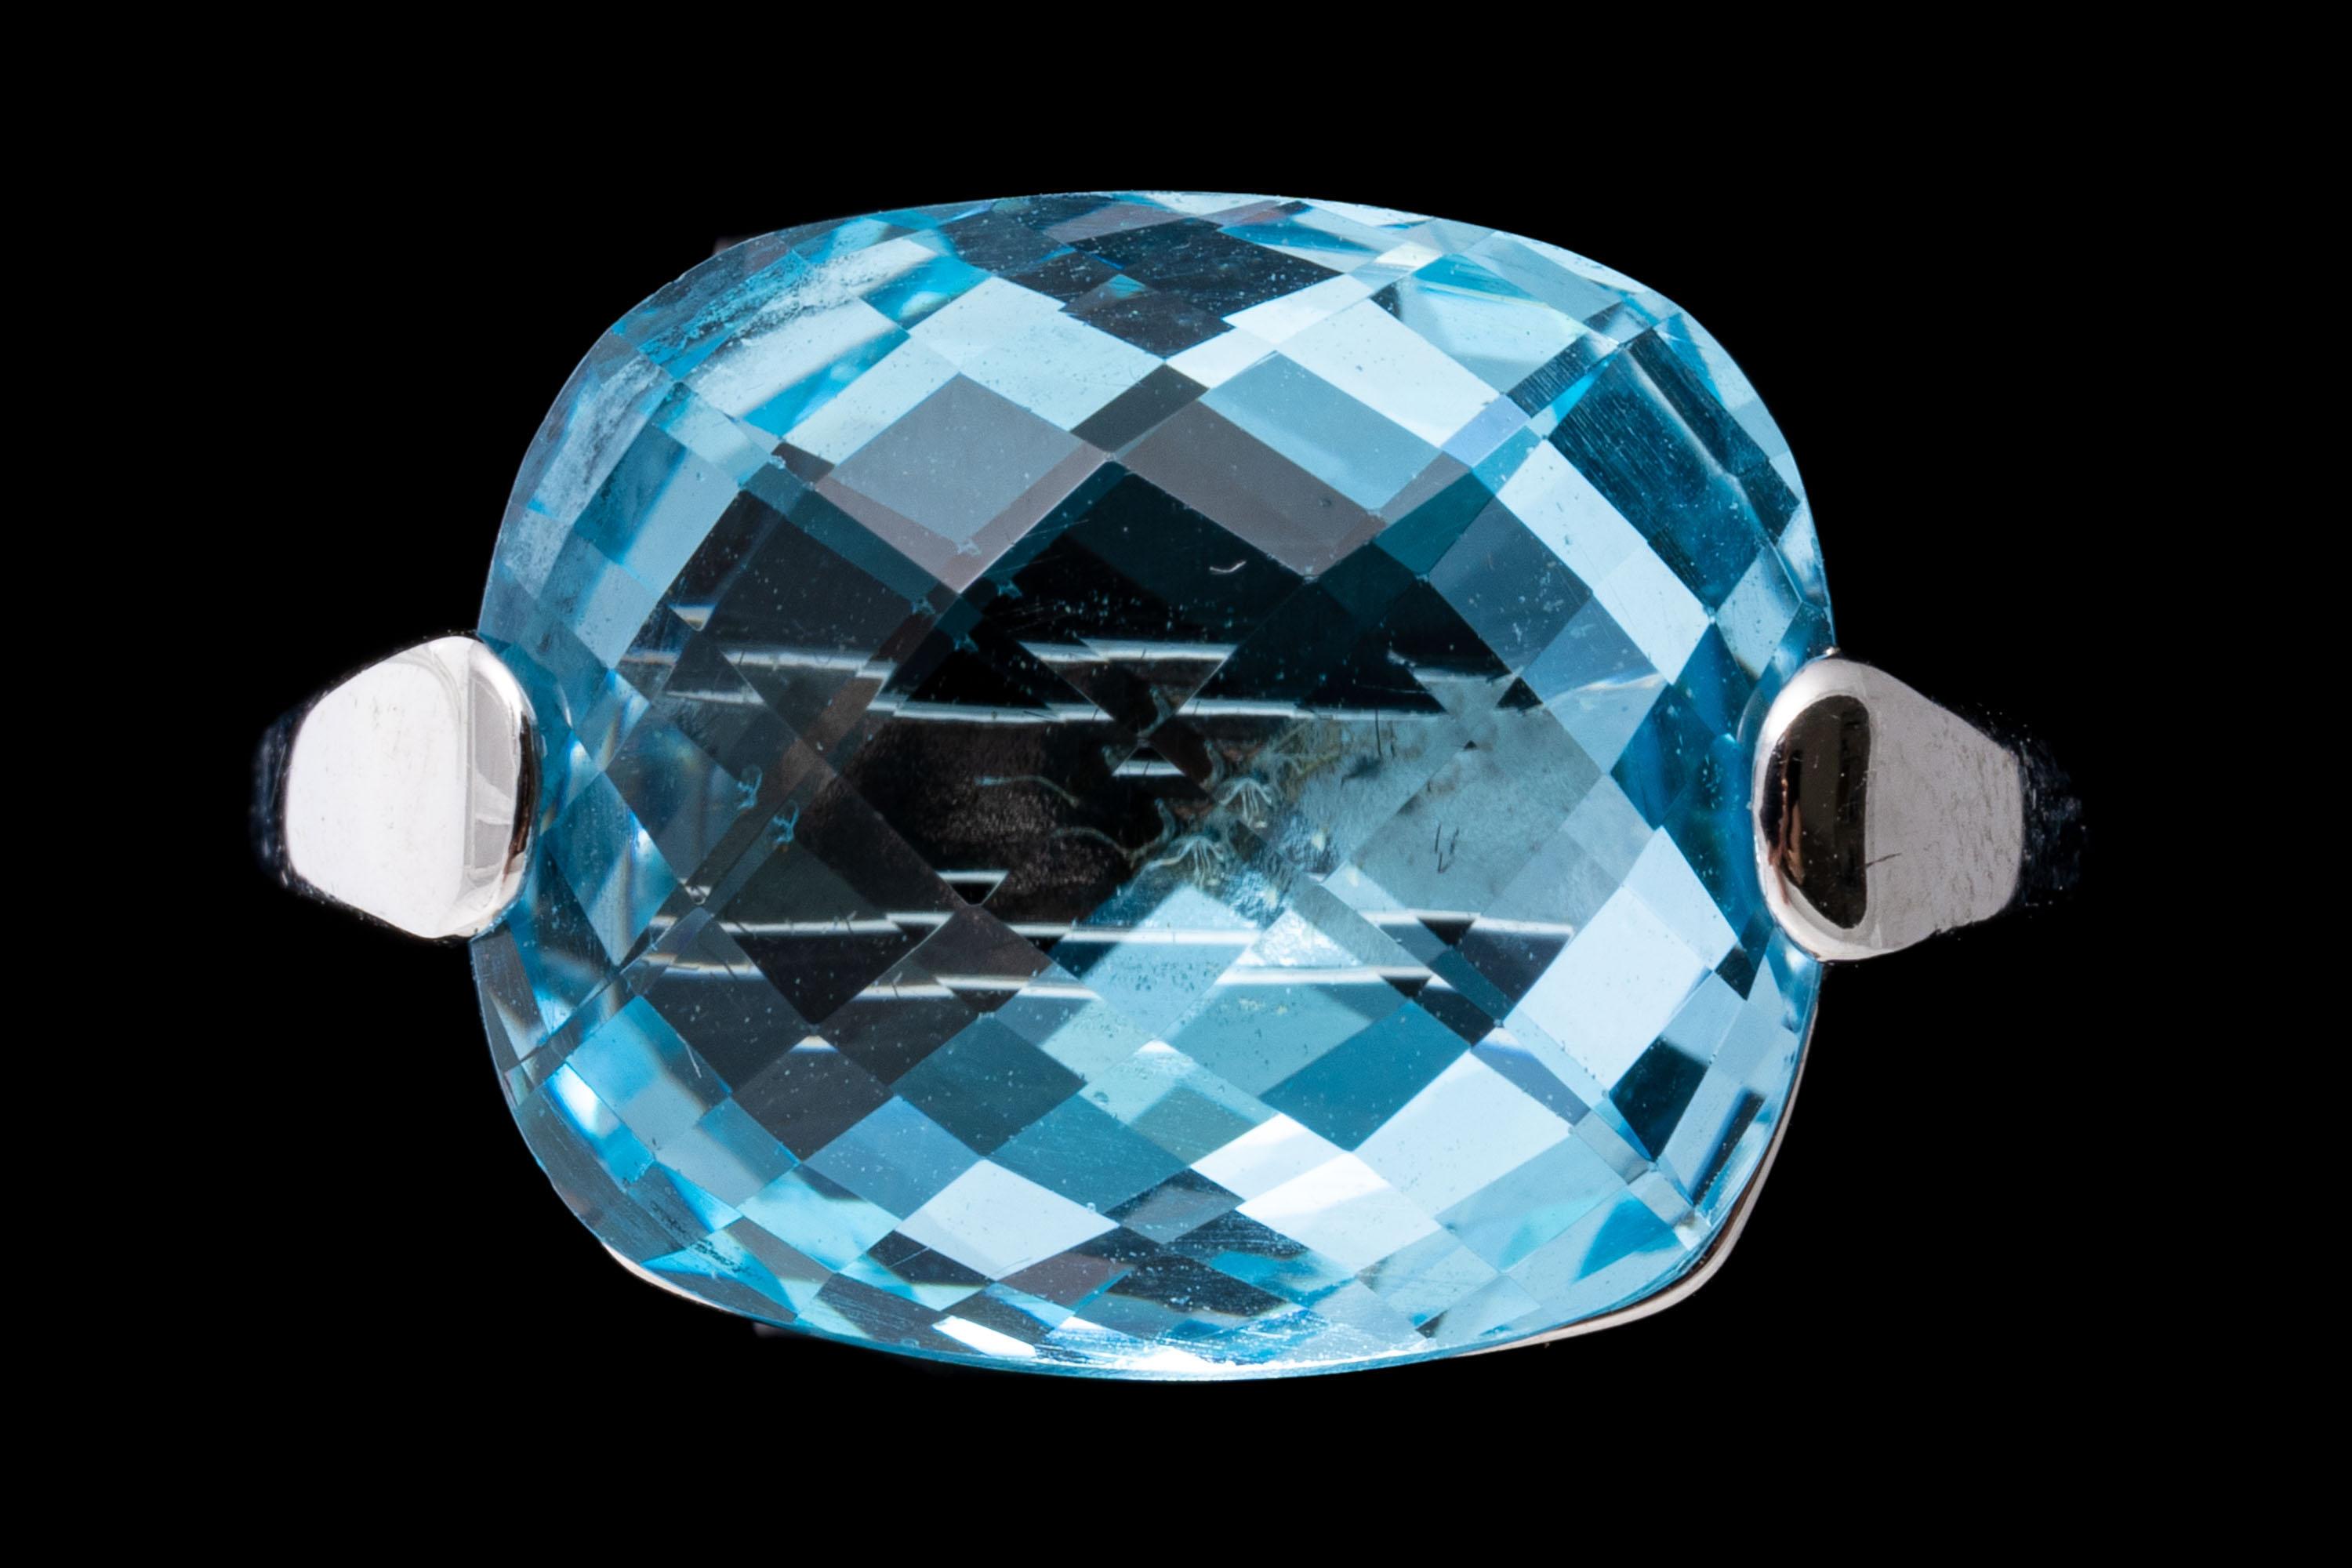 14k white gold ring. This lovely contemporary ring is a horizontal, rectangular checkerboard cushion, light blue color blue topaz, approximately 8.51 CTS, set atop a narrow, airline style shank with two wide prongs.
Marks: 14k
Dimensions: 1/2